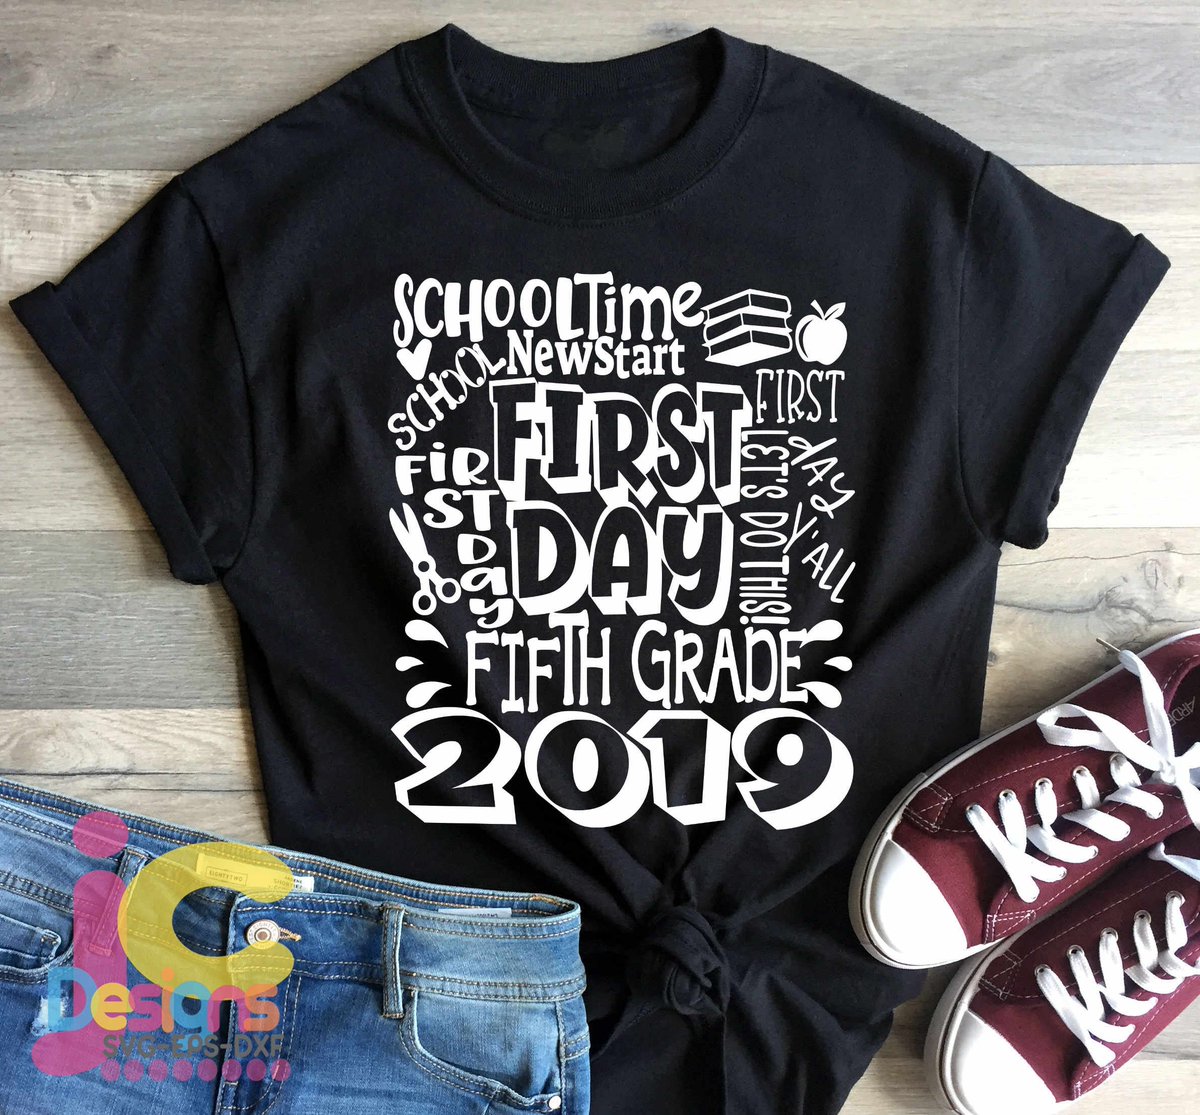 Download Jencraft Designs On Twitter 2019 Fifth Grade Svg Back To School Svg First Day Svg 5th Grade Typography First Day Of School Svg Sublimation Png Student Eps Dxf Schoolsvg Svg 2 99